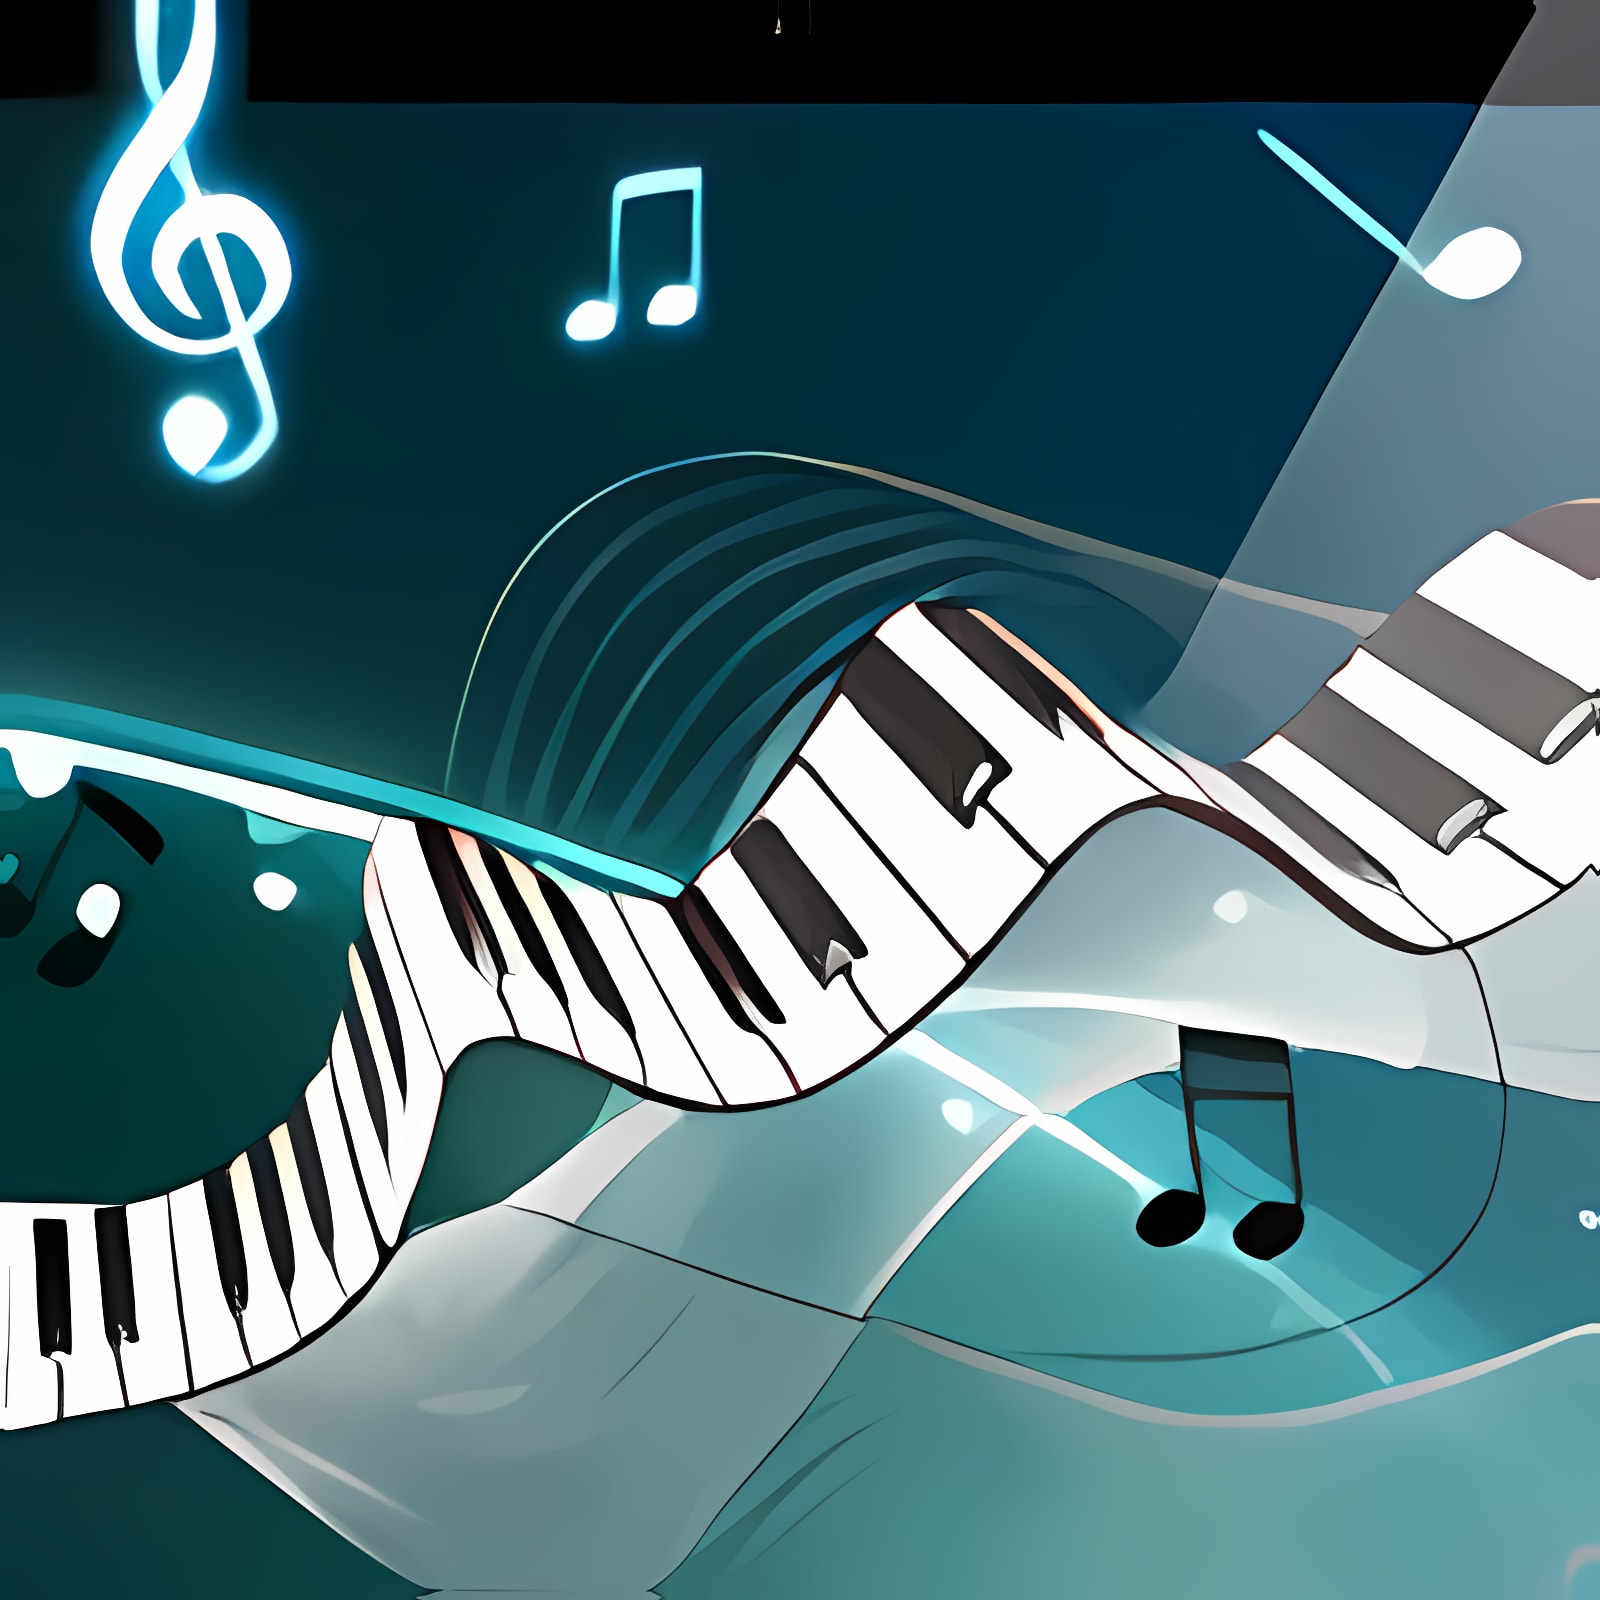 Everyone Piano 2.5.7.28 download the last version for android